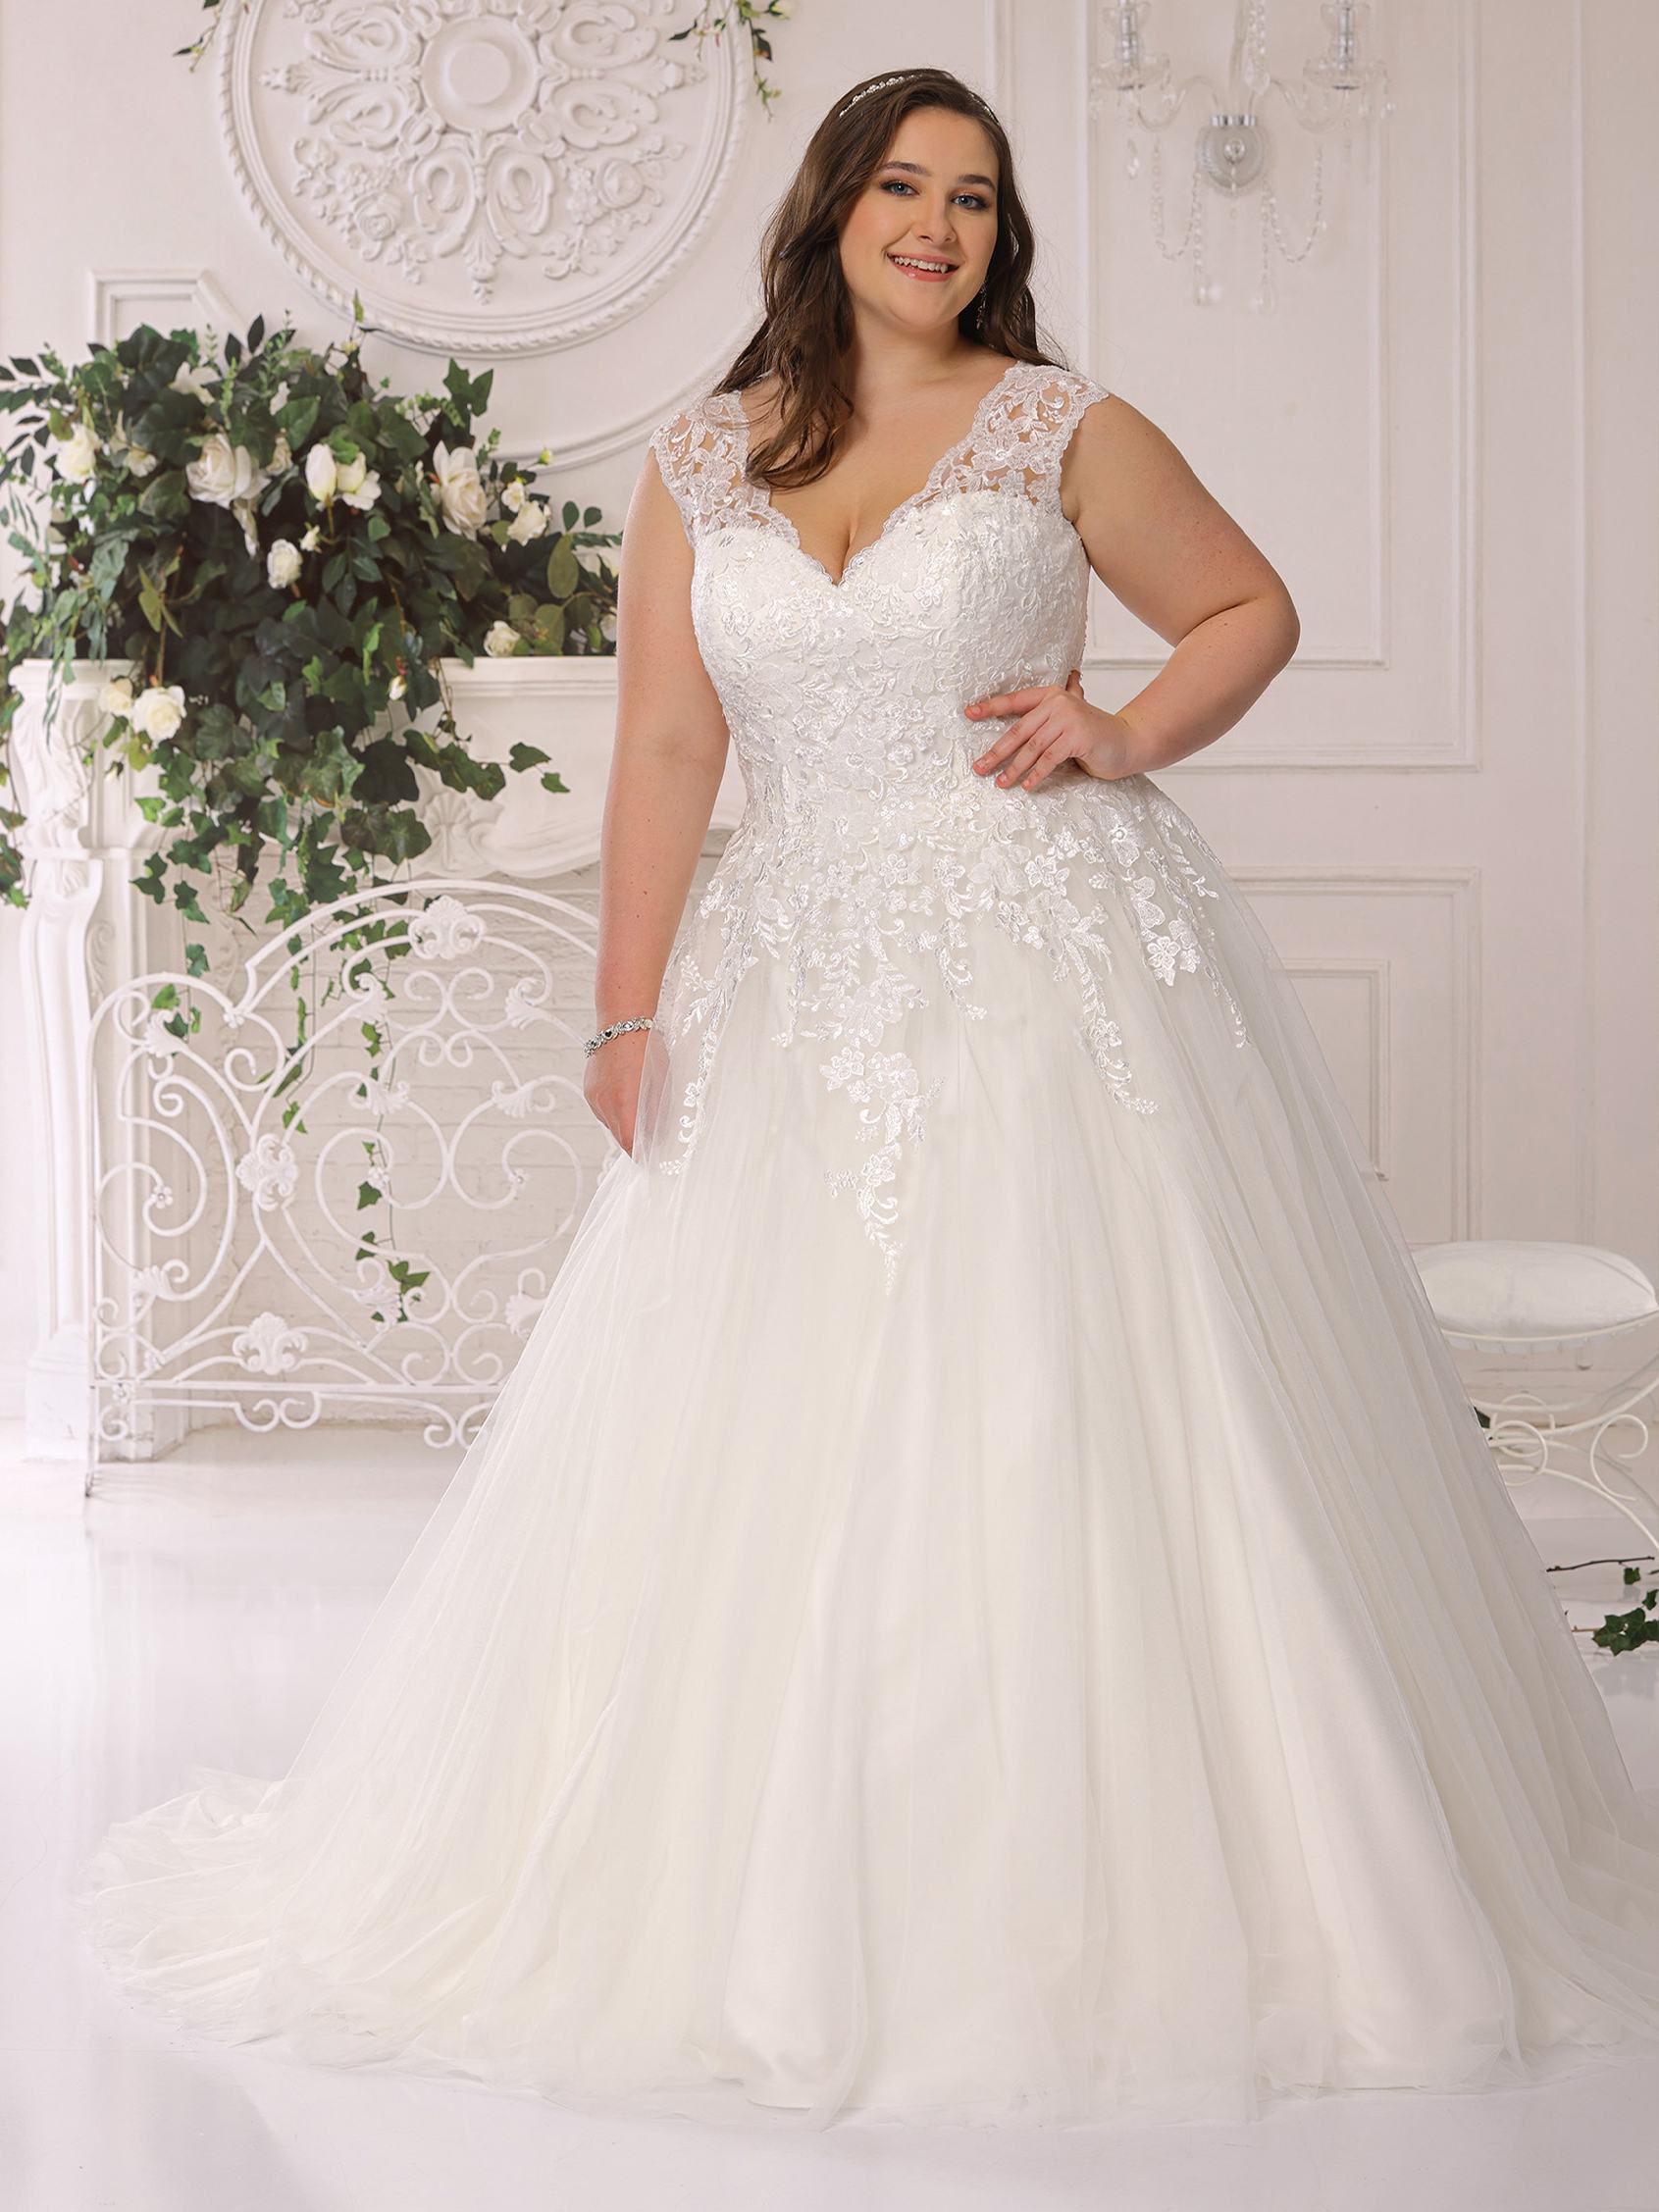 A-line wedding dress with V-neck in tulle lace | Lady Bird